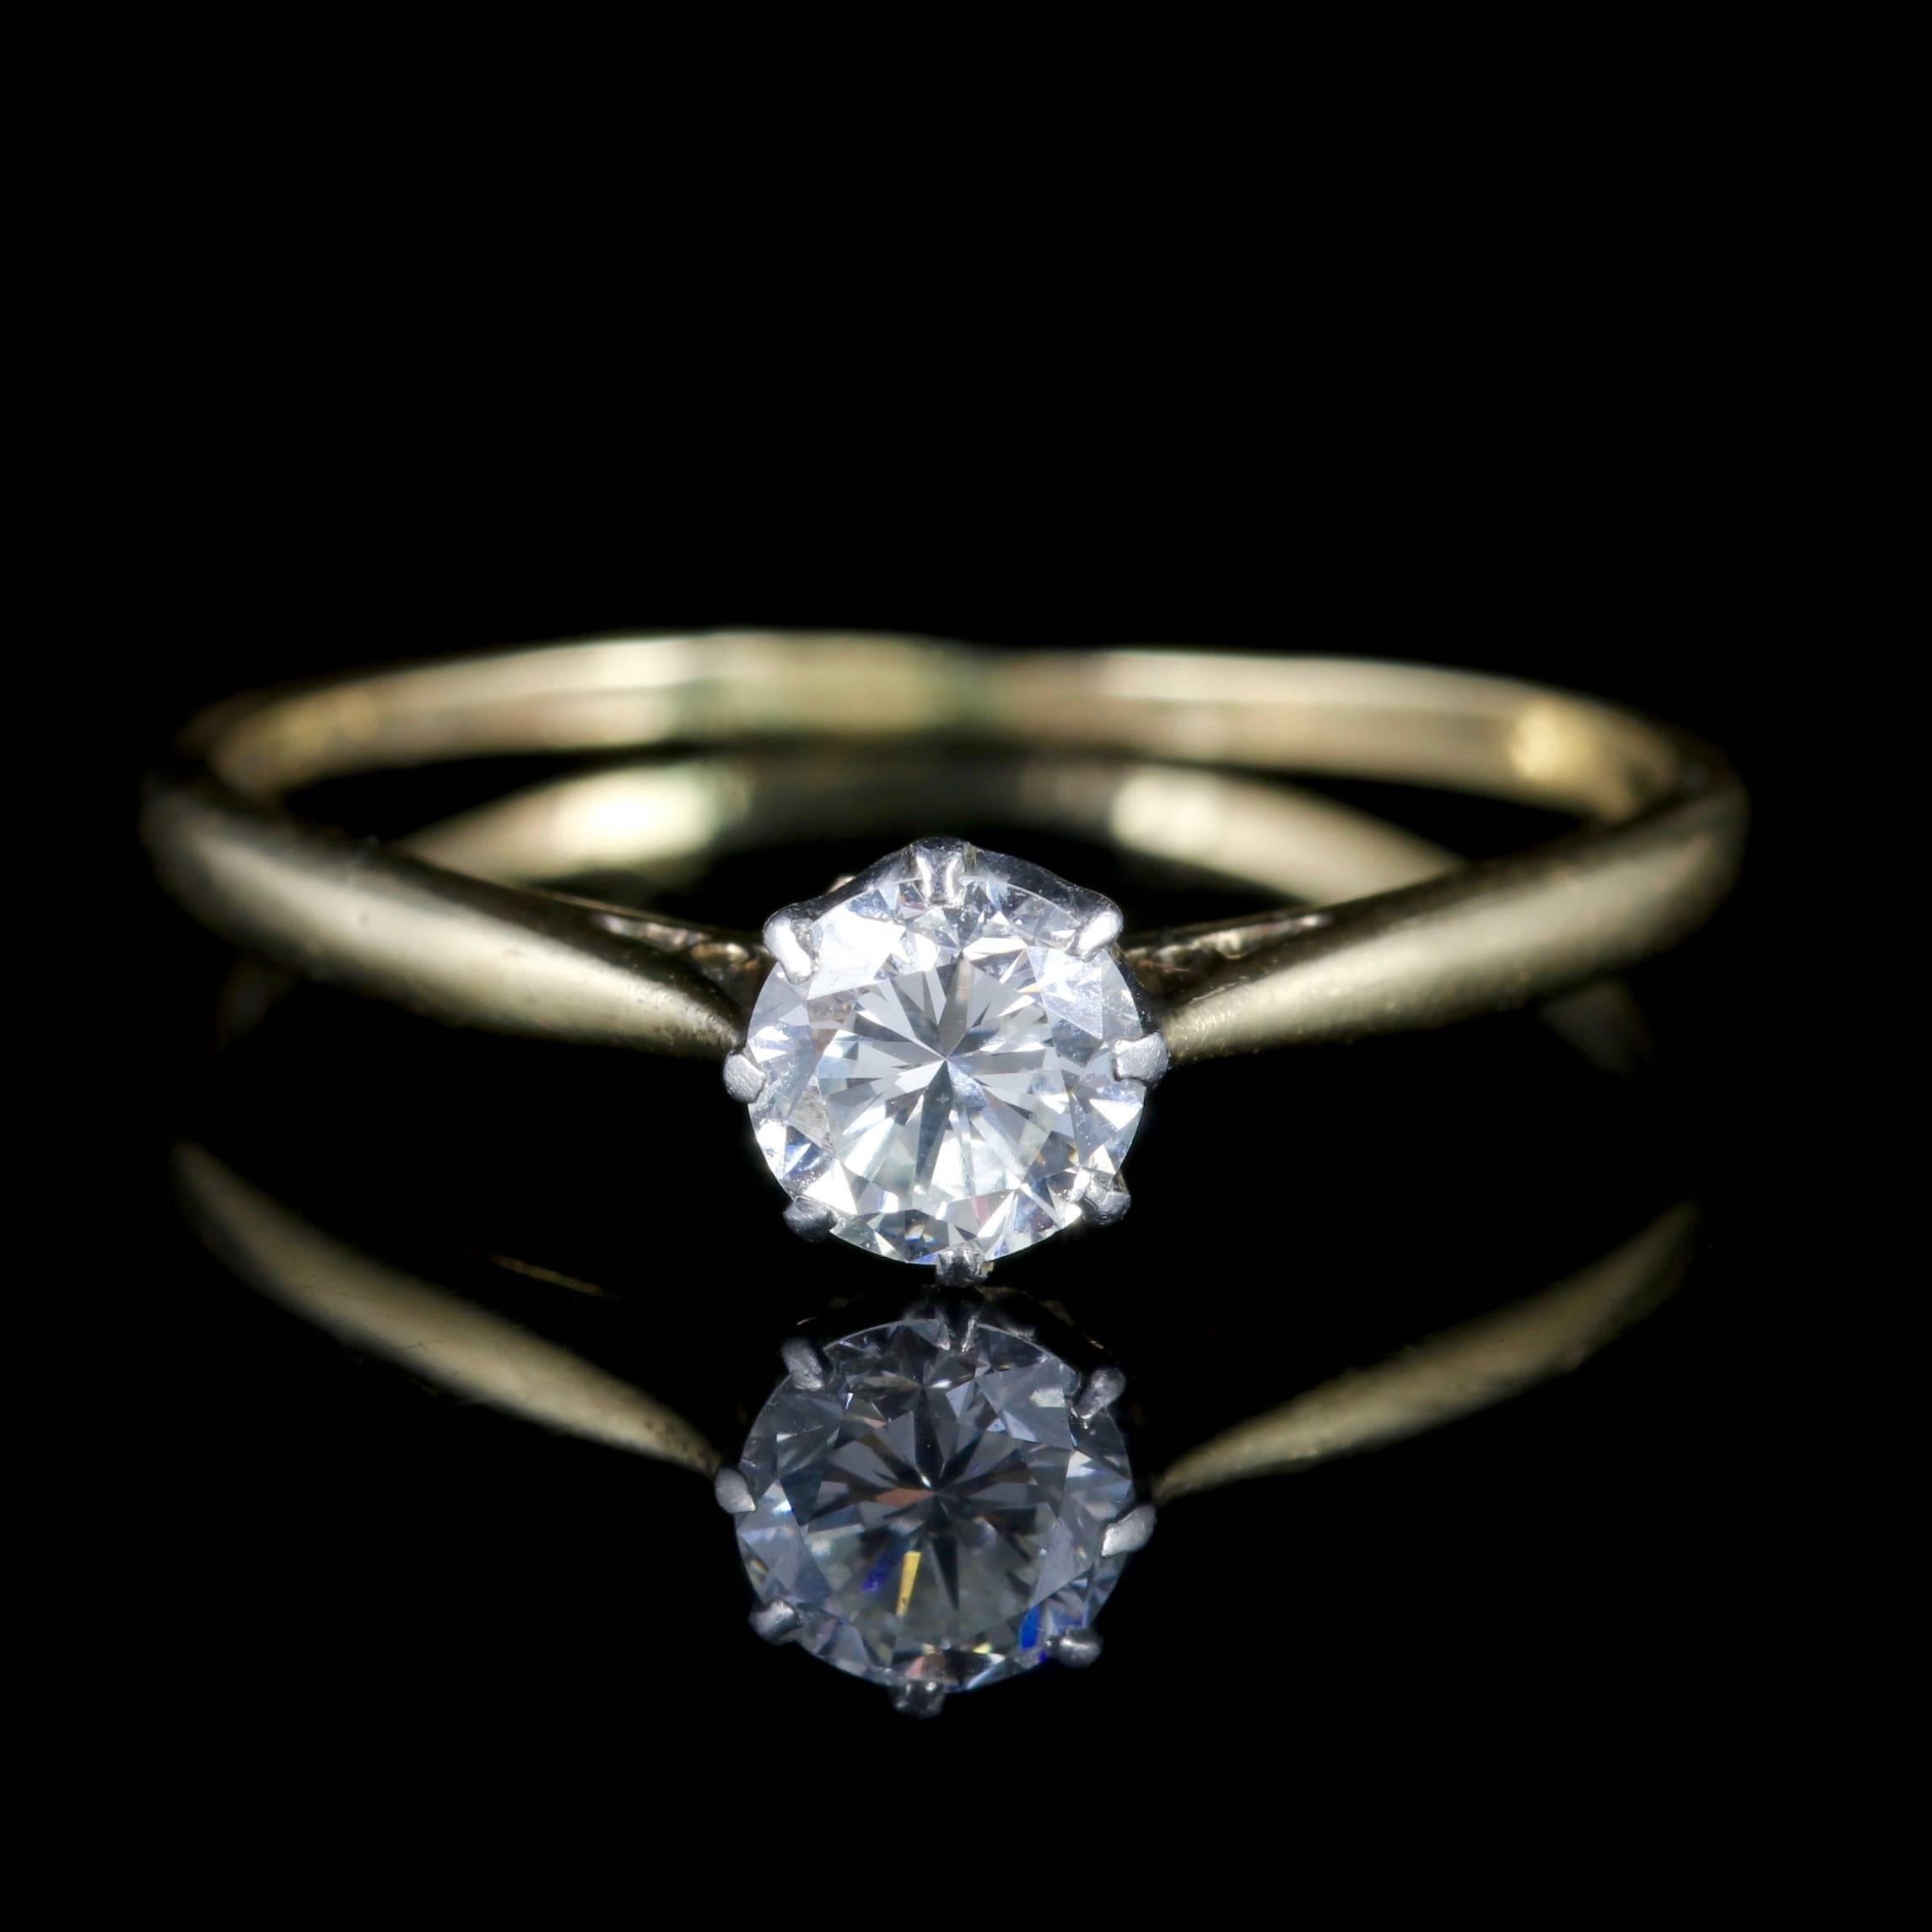 This fabulous antique Diamond solitaire ring is genuine Edwardian Circa 1910.

Set with a lovely old cut Diamond in the centre which is approx. 0.47ct in size.

Diamond is the hardest mineral on Earth and this combined with its exceptional lustre